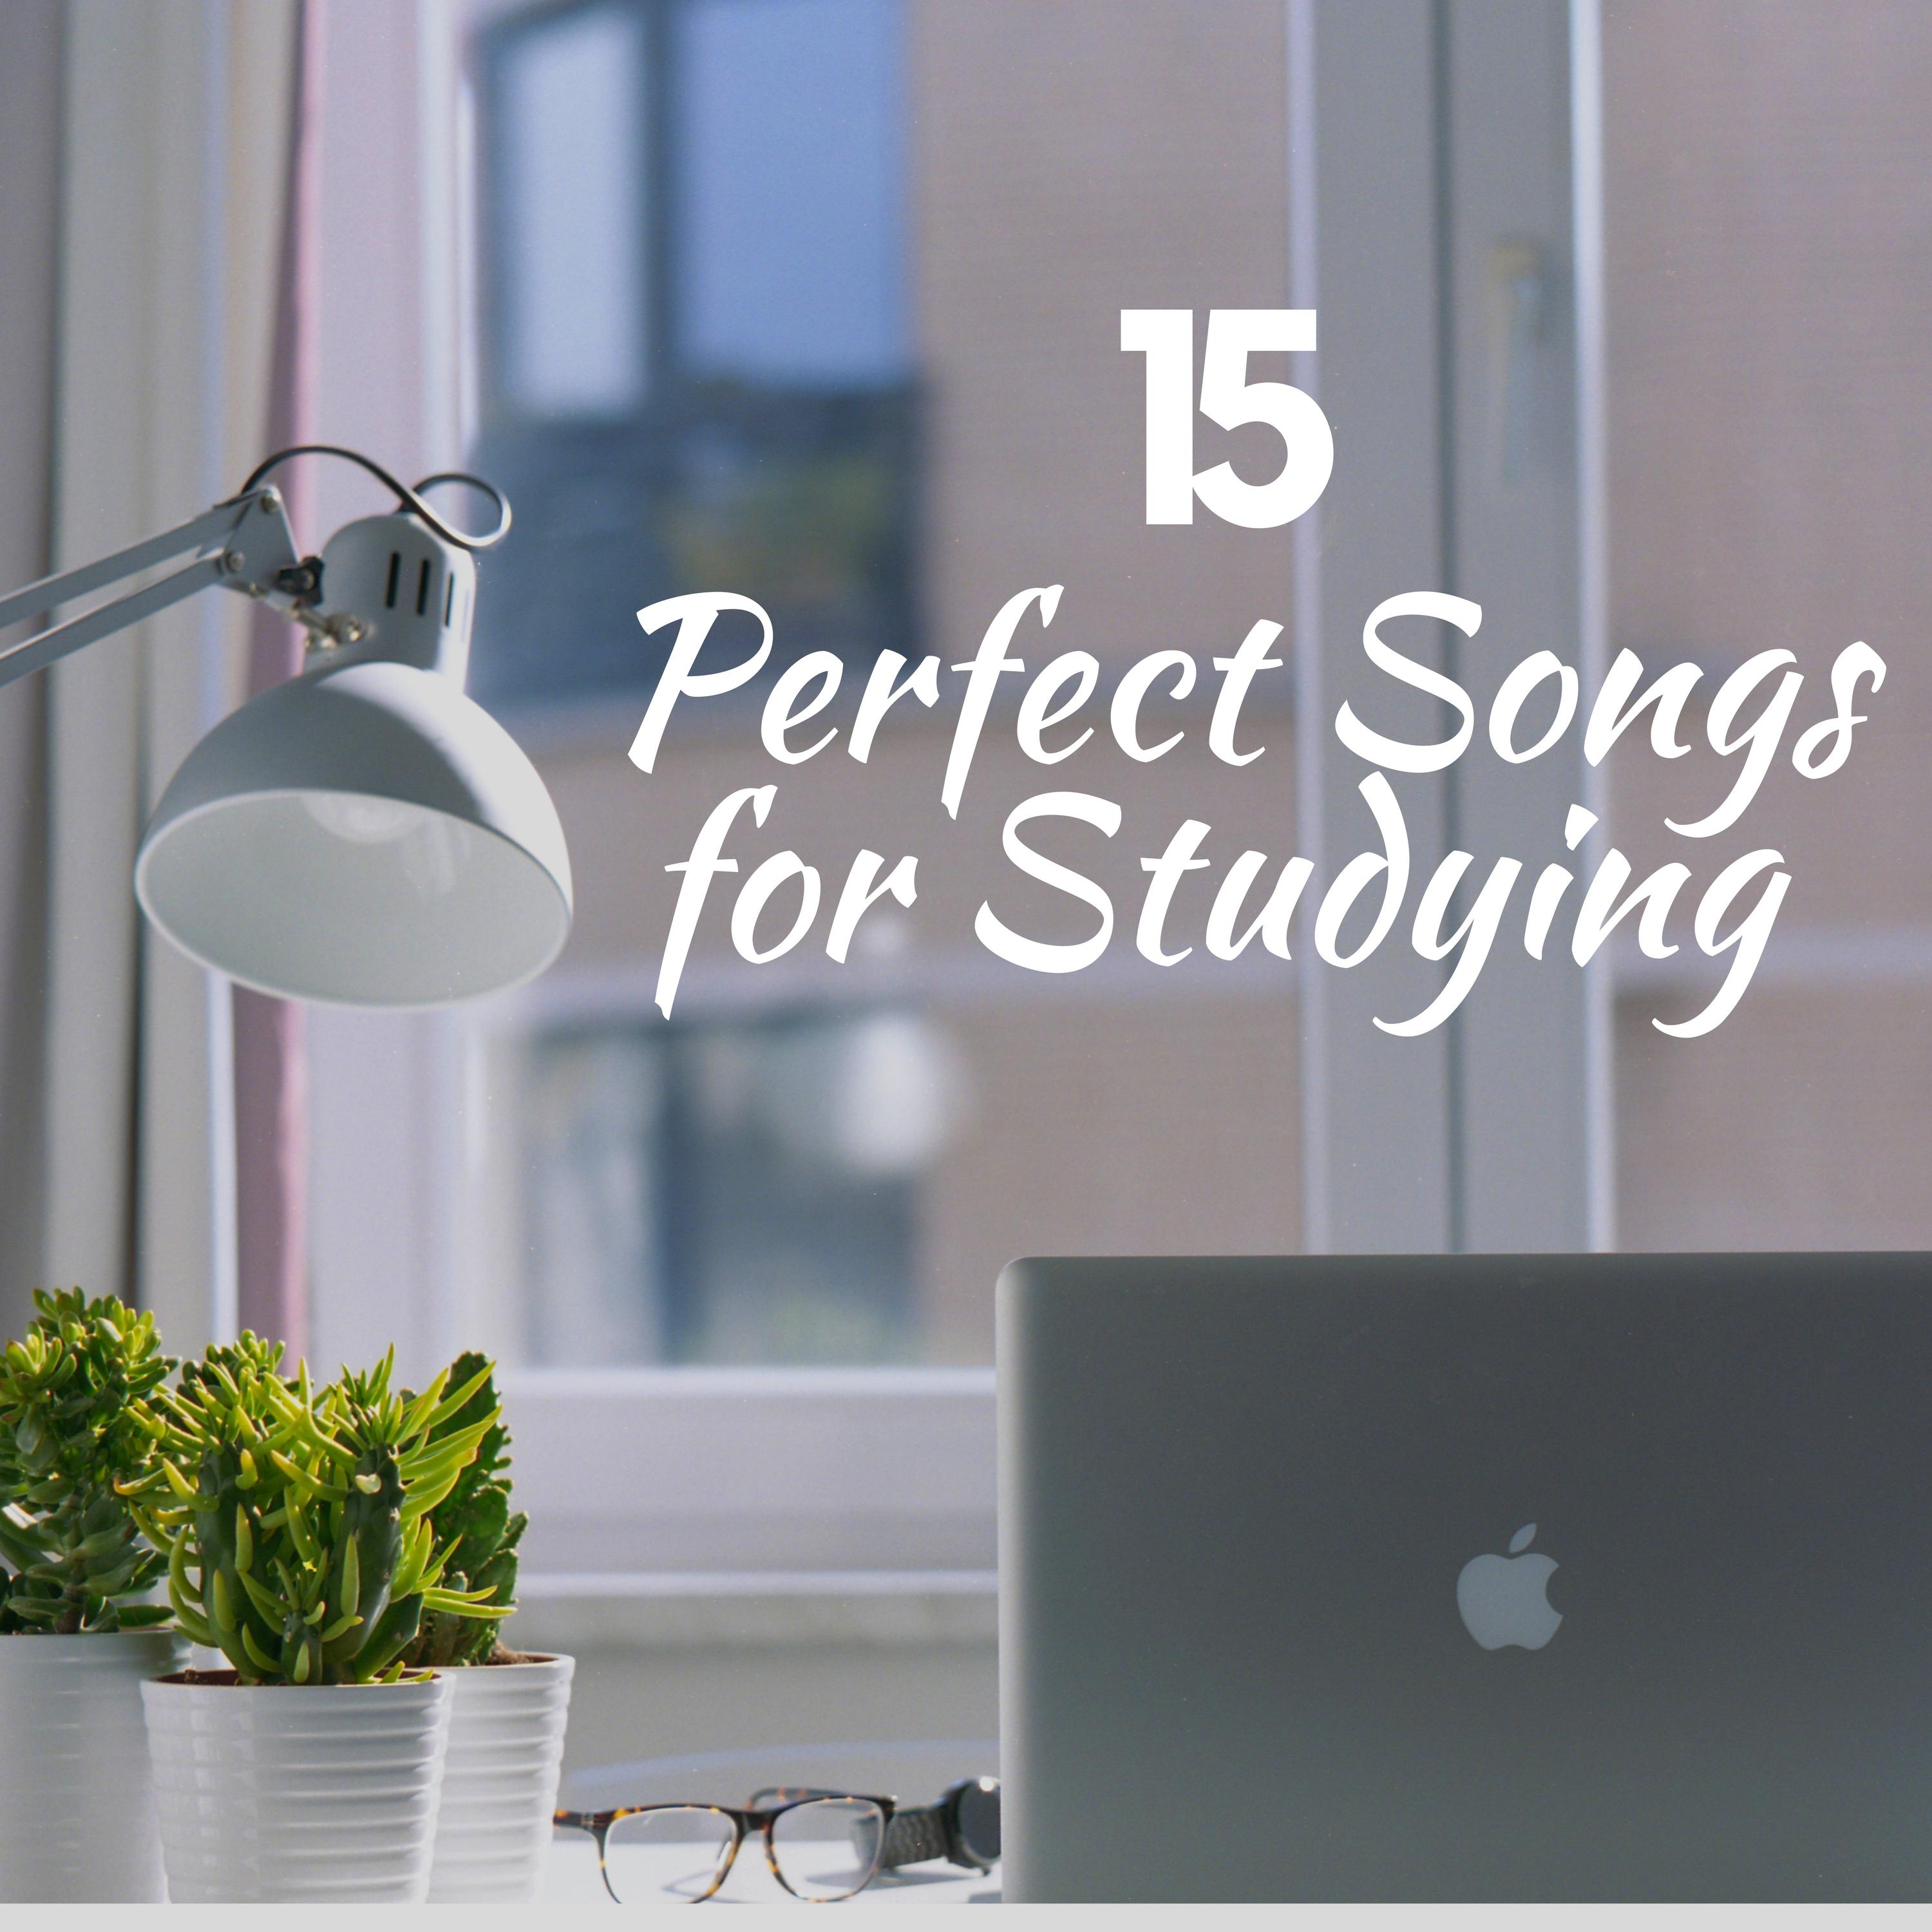 15 Perfect Songs for Studying - Concentrate Better, Focus Music with Nature Sounds and Piano Music